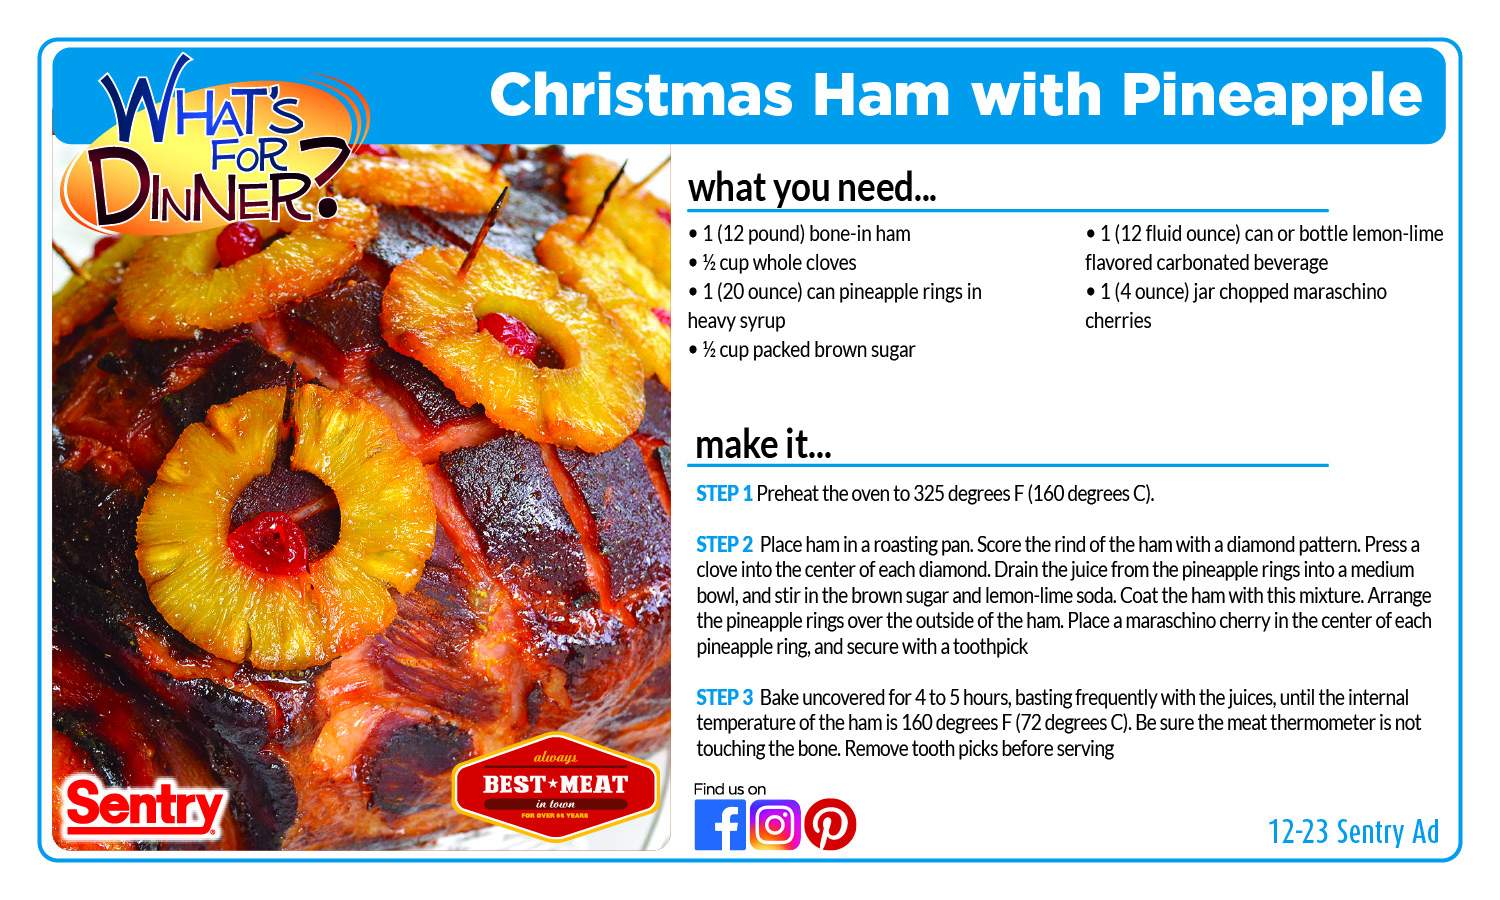 Recipe card for Christmas Ham with Pineapple